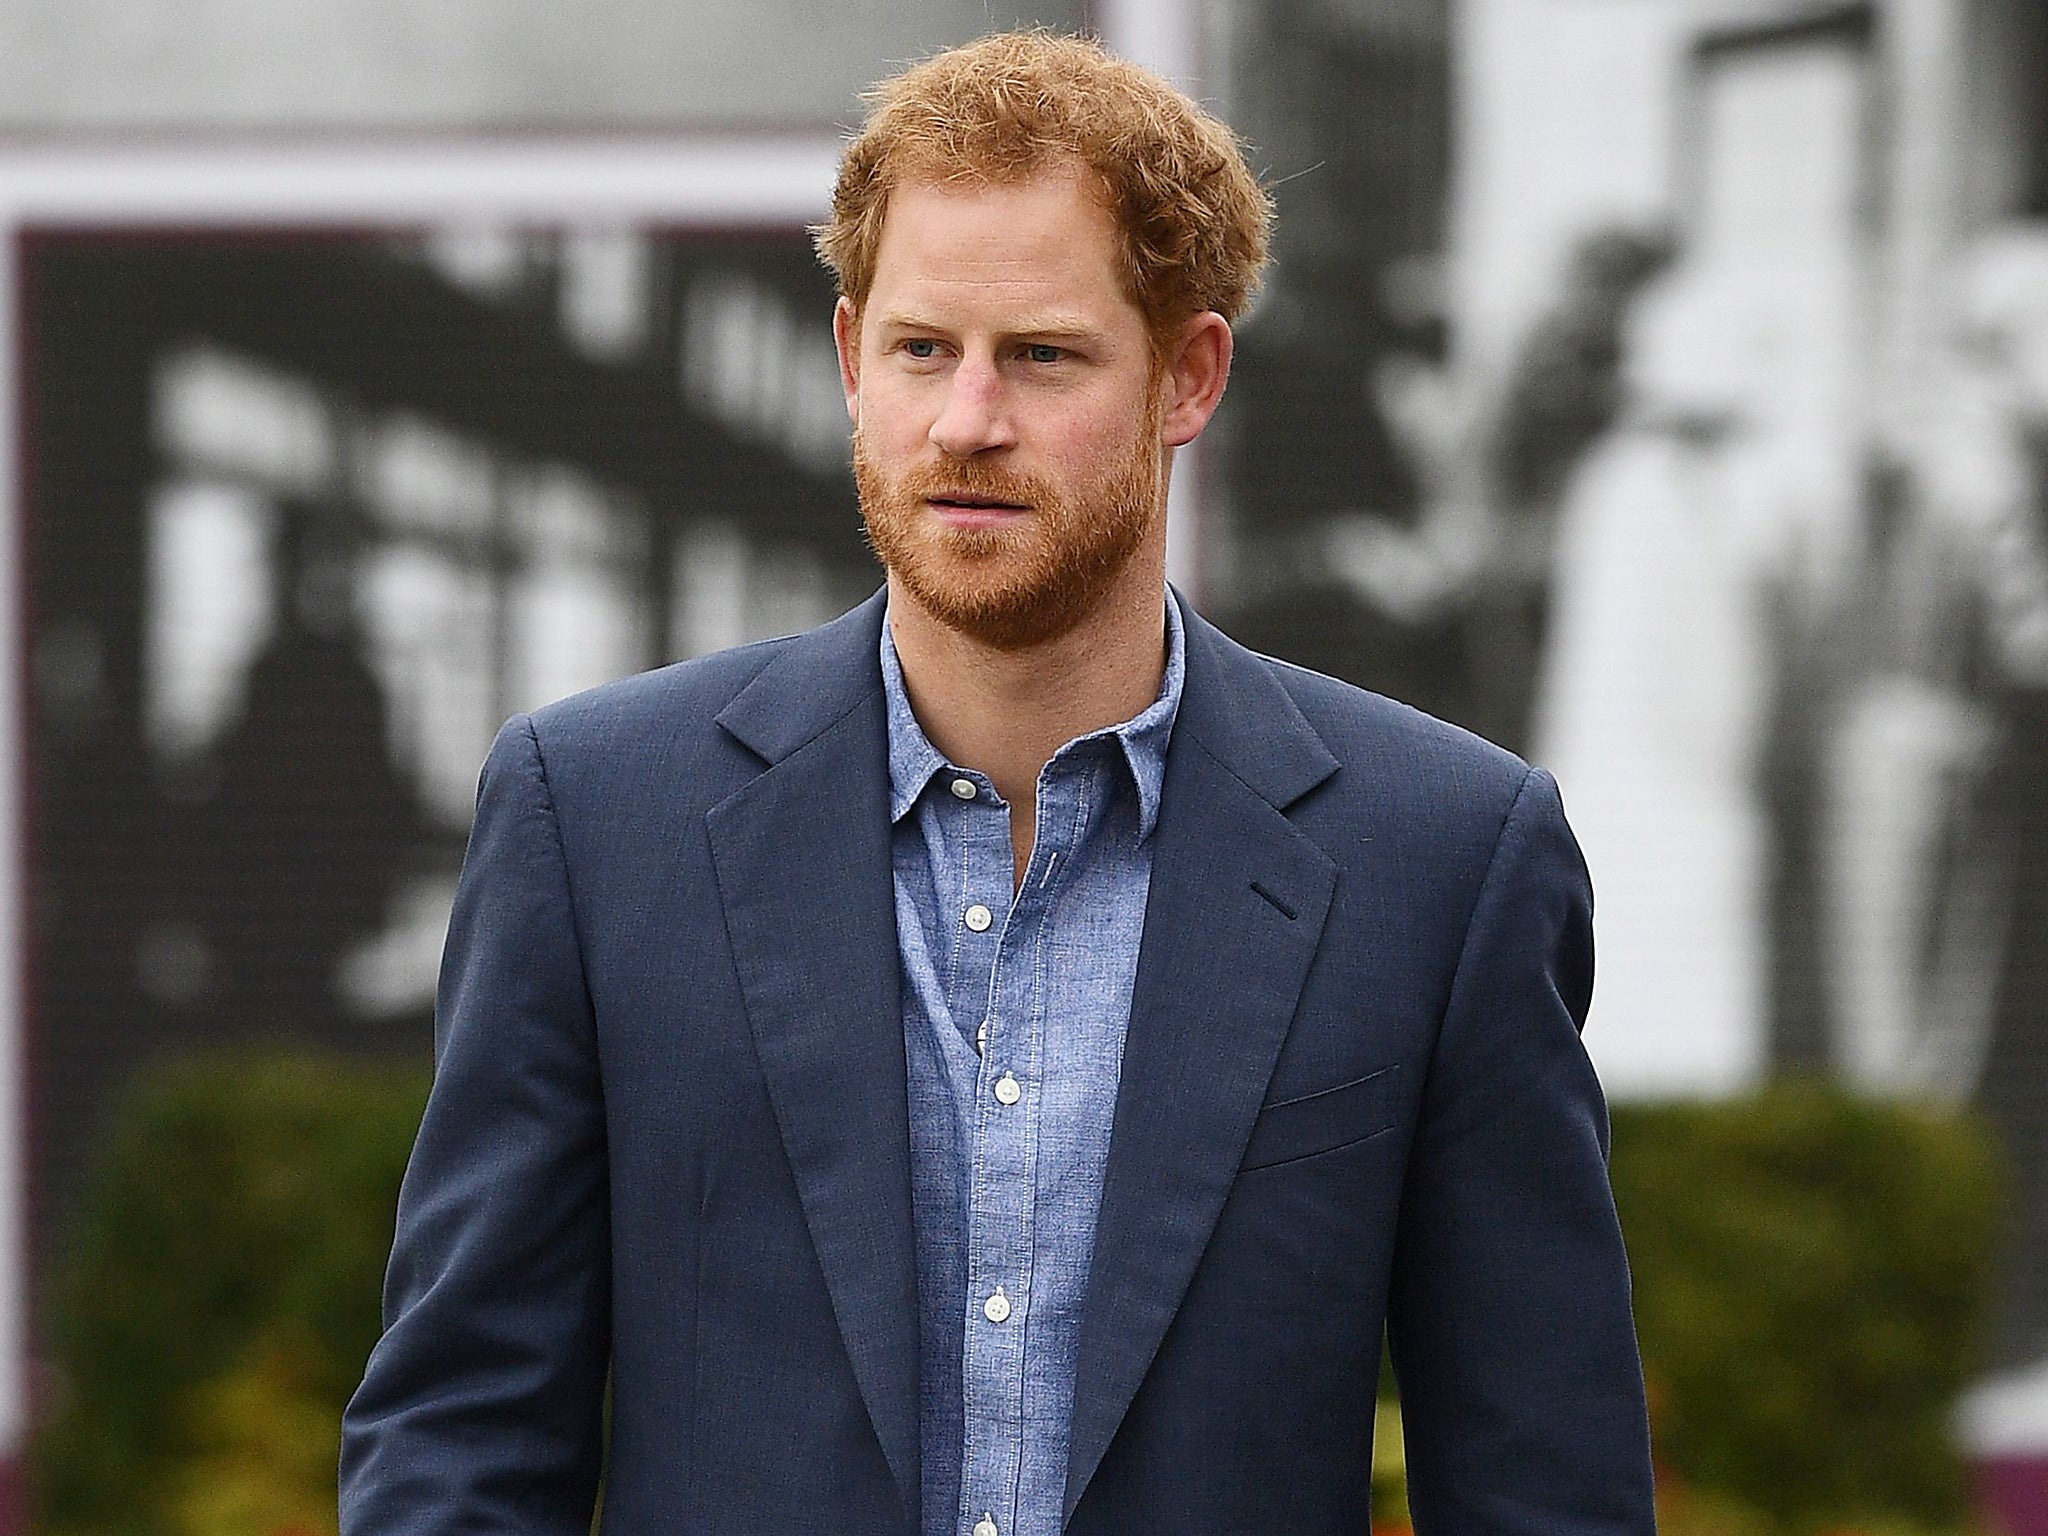 Prince Harry has revealed that he had counselling after the death of his mother